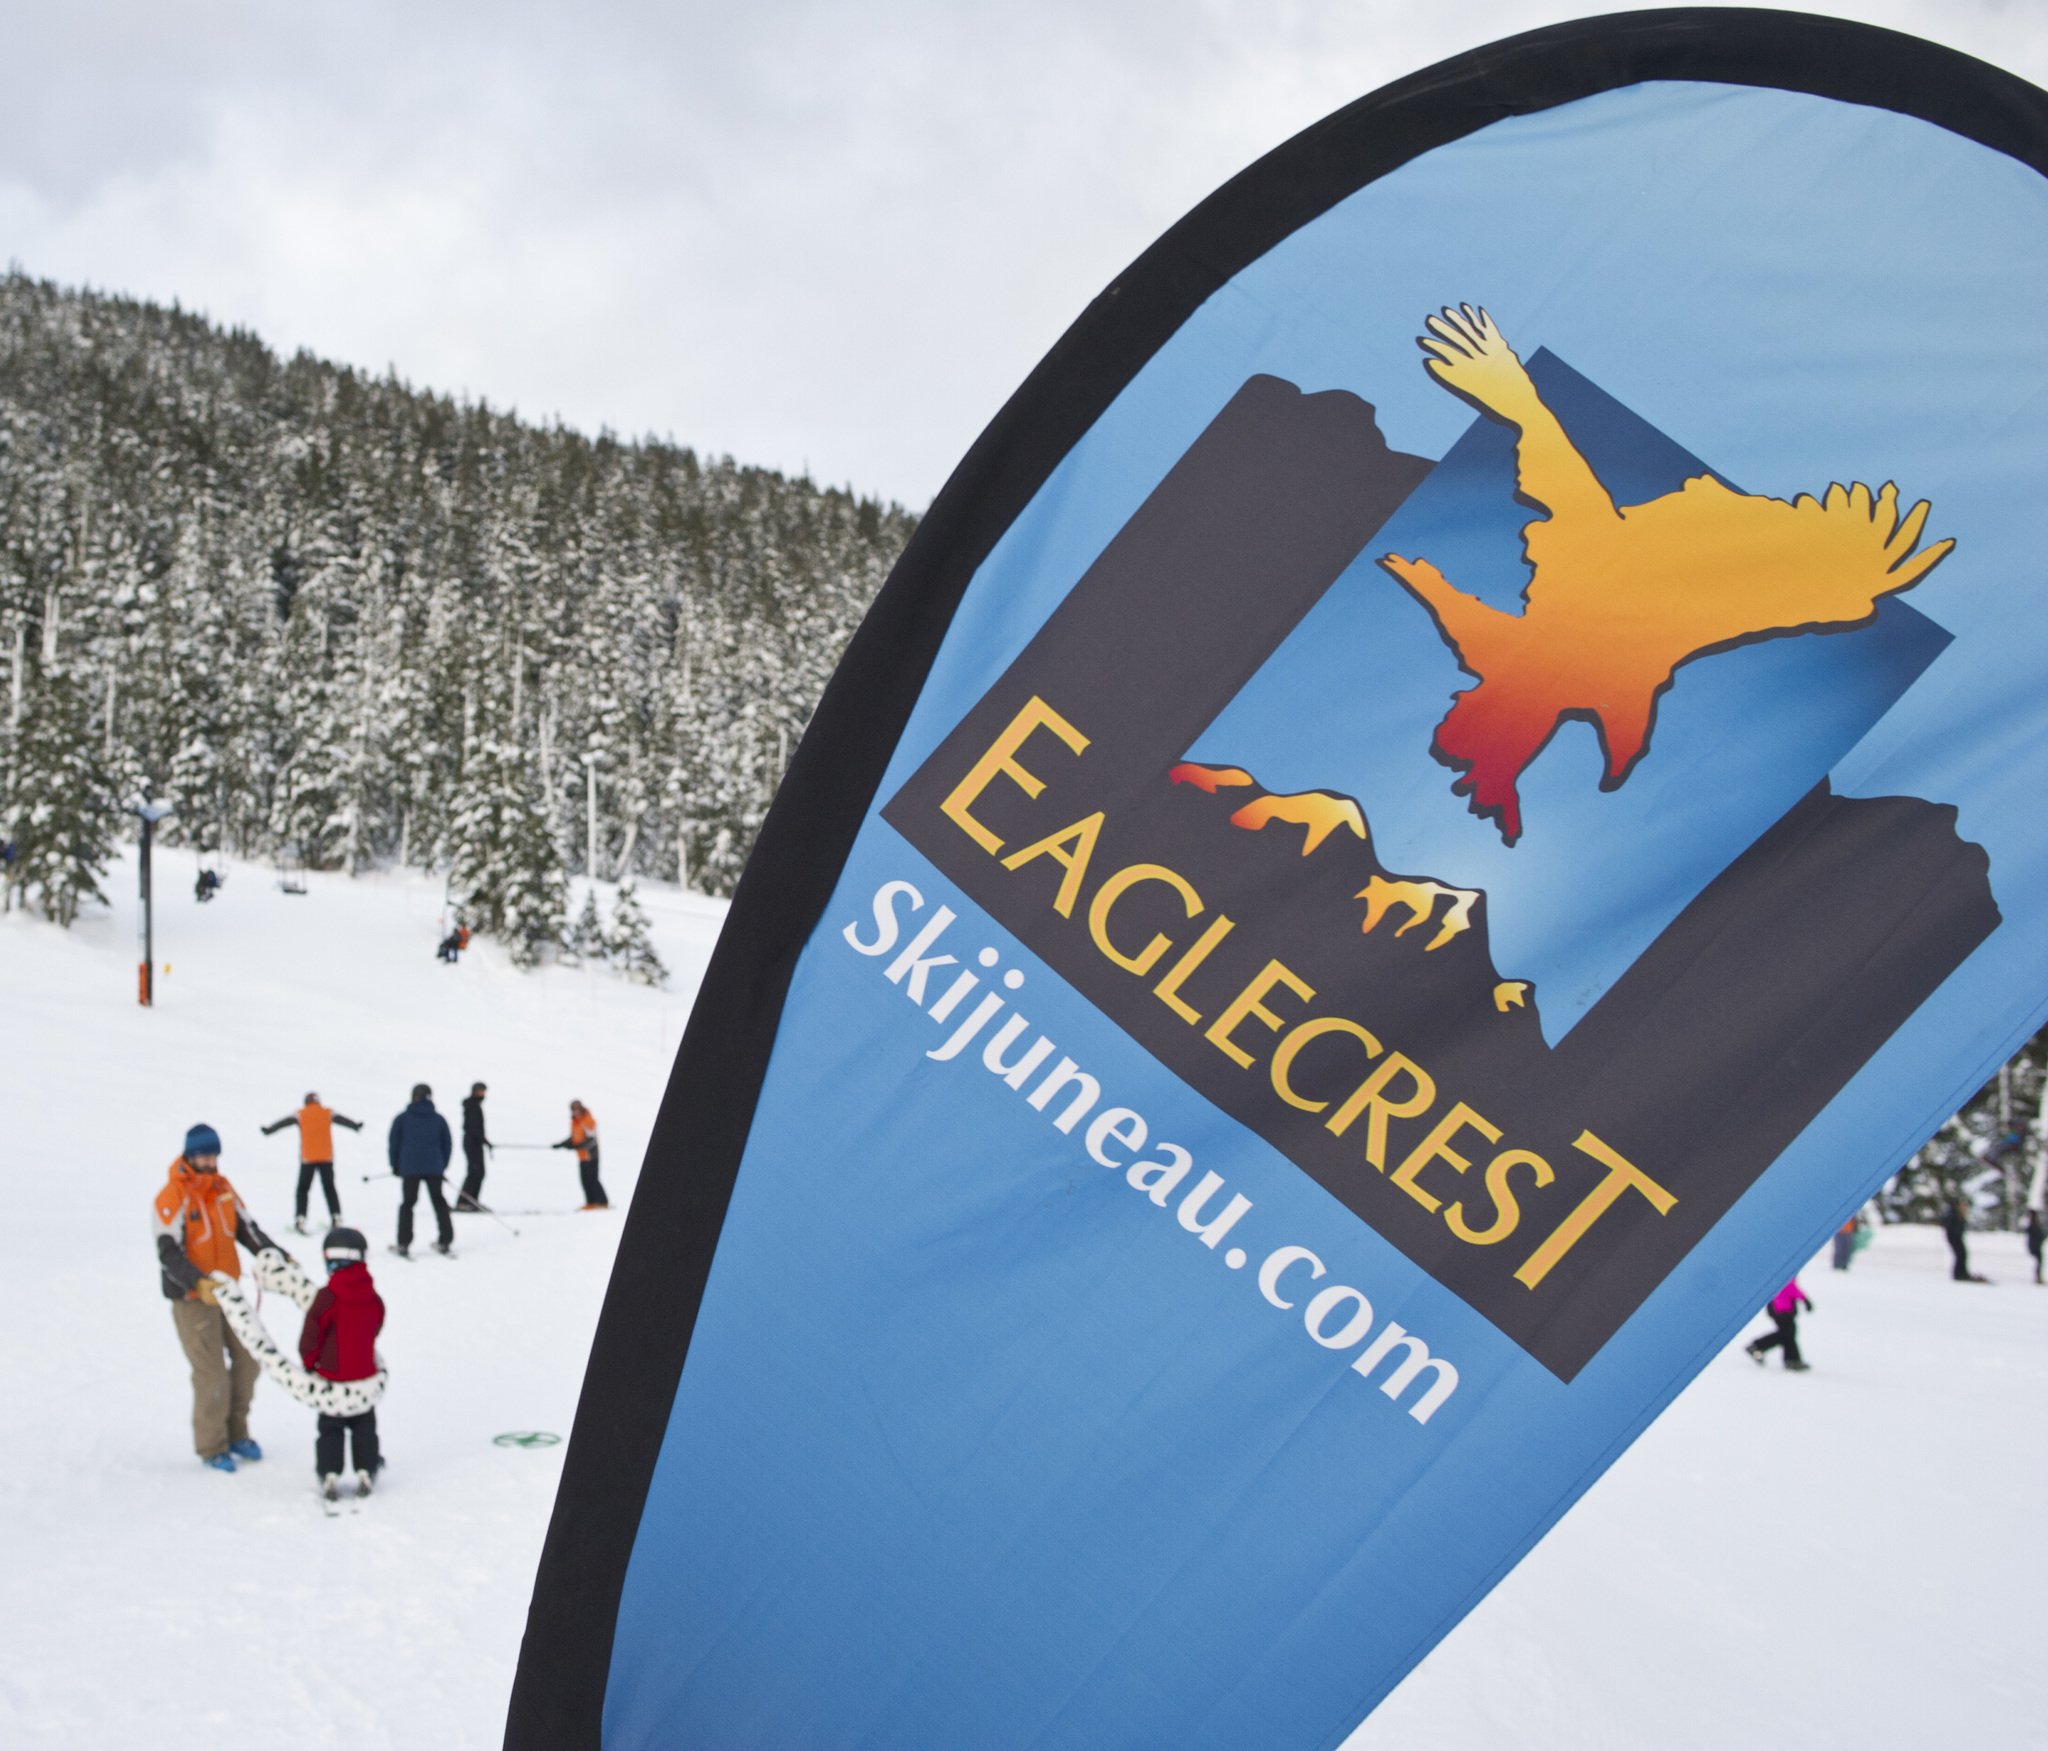 The World’s Largest Lesson at Eaglecrest took place on Jan. 6, 2017. A movie night Saturday, Nov. 18 aims to raise money for the Eaglecrest Foundation. (Michael Penn | Juneau Empire)